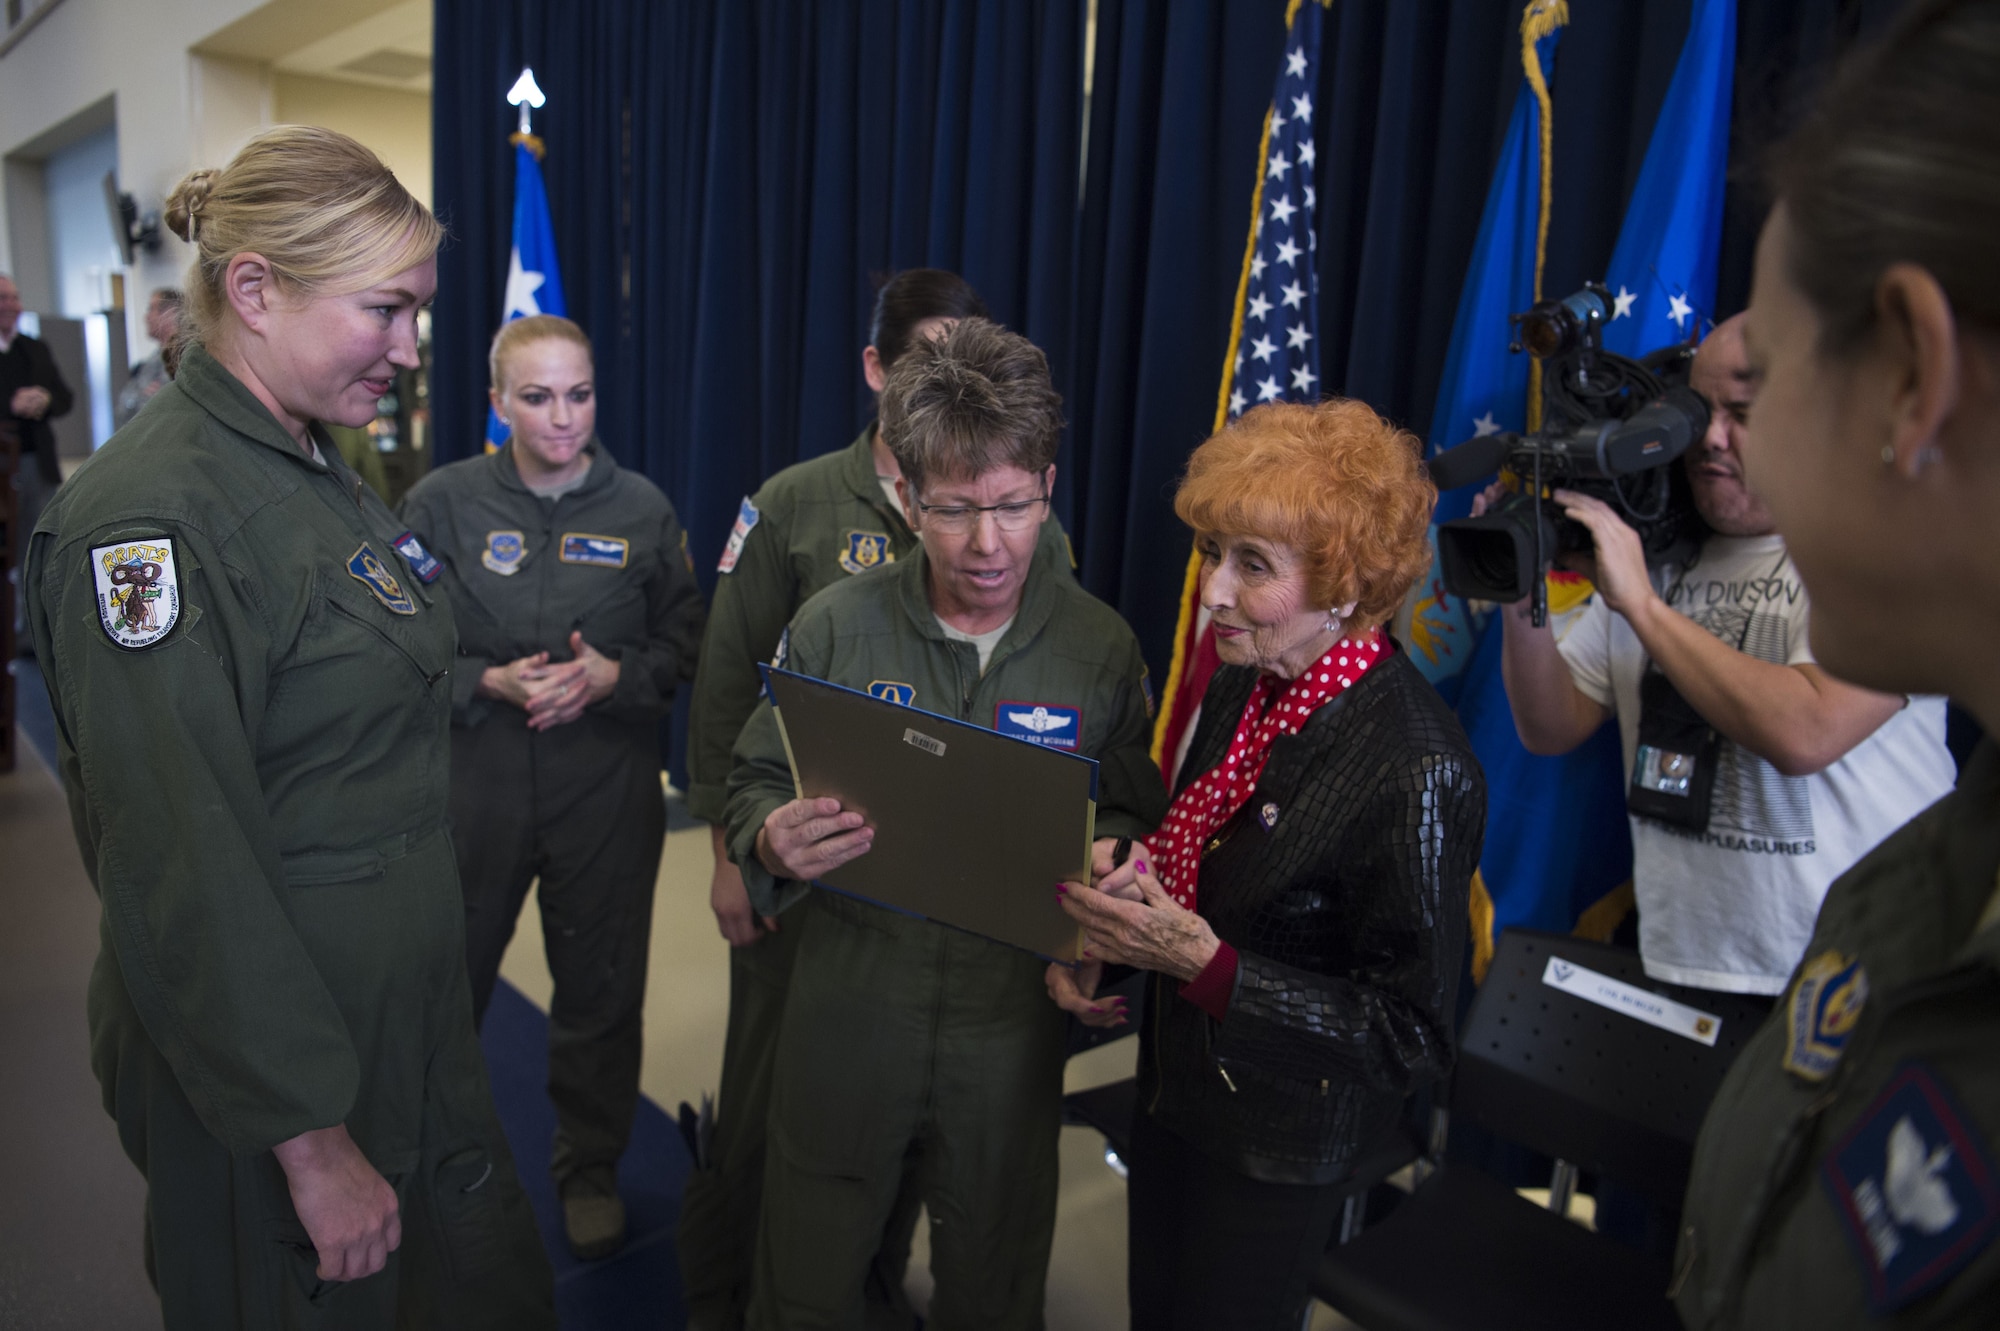 Ms. Elinor Otto autographs pictures for the members of March Air Reserve Base.